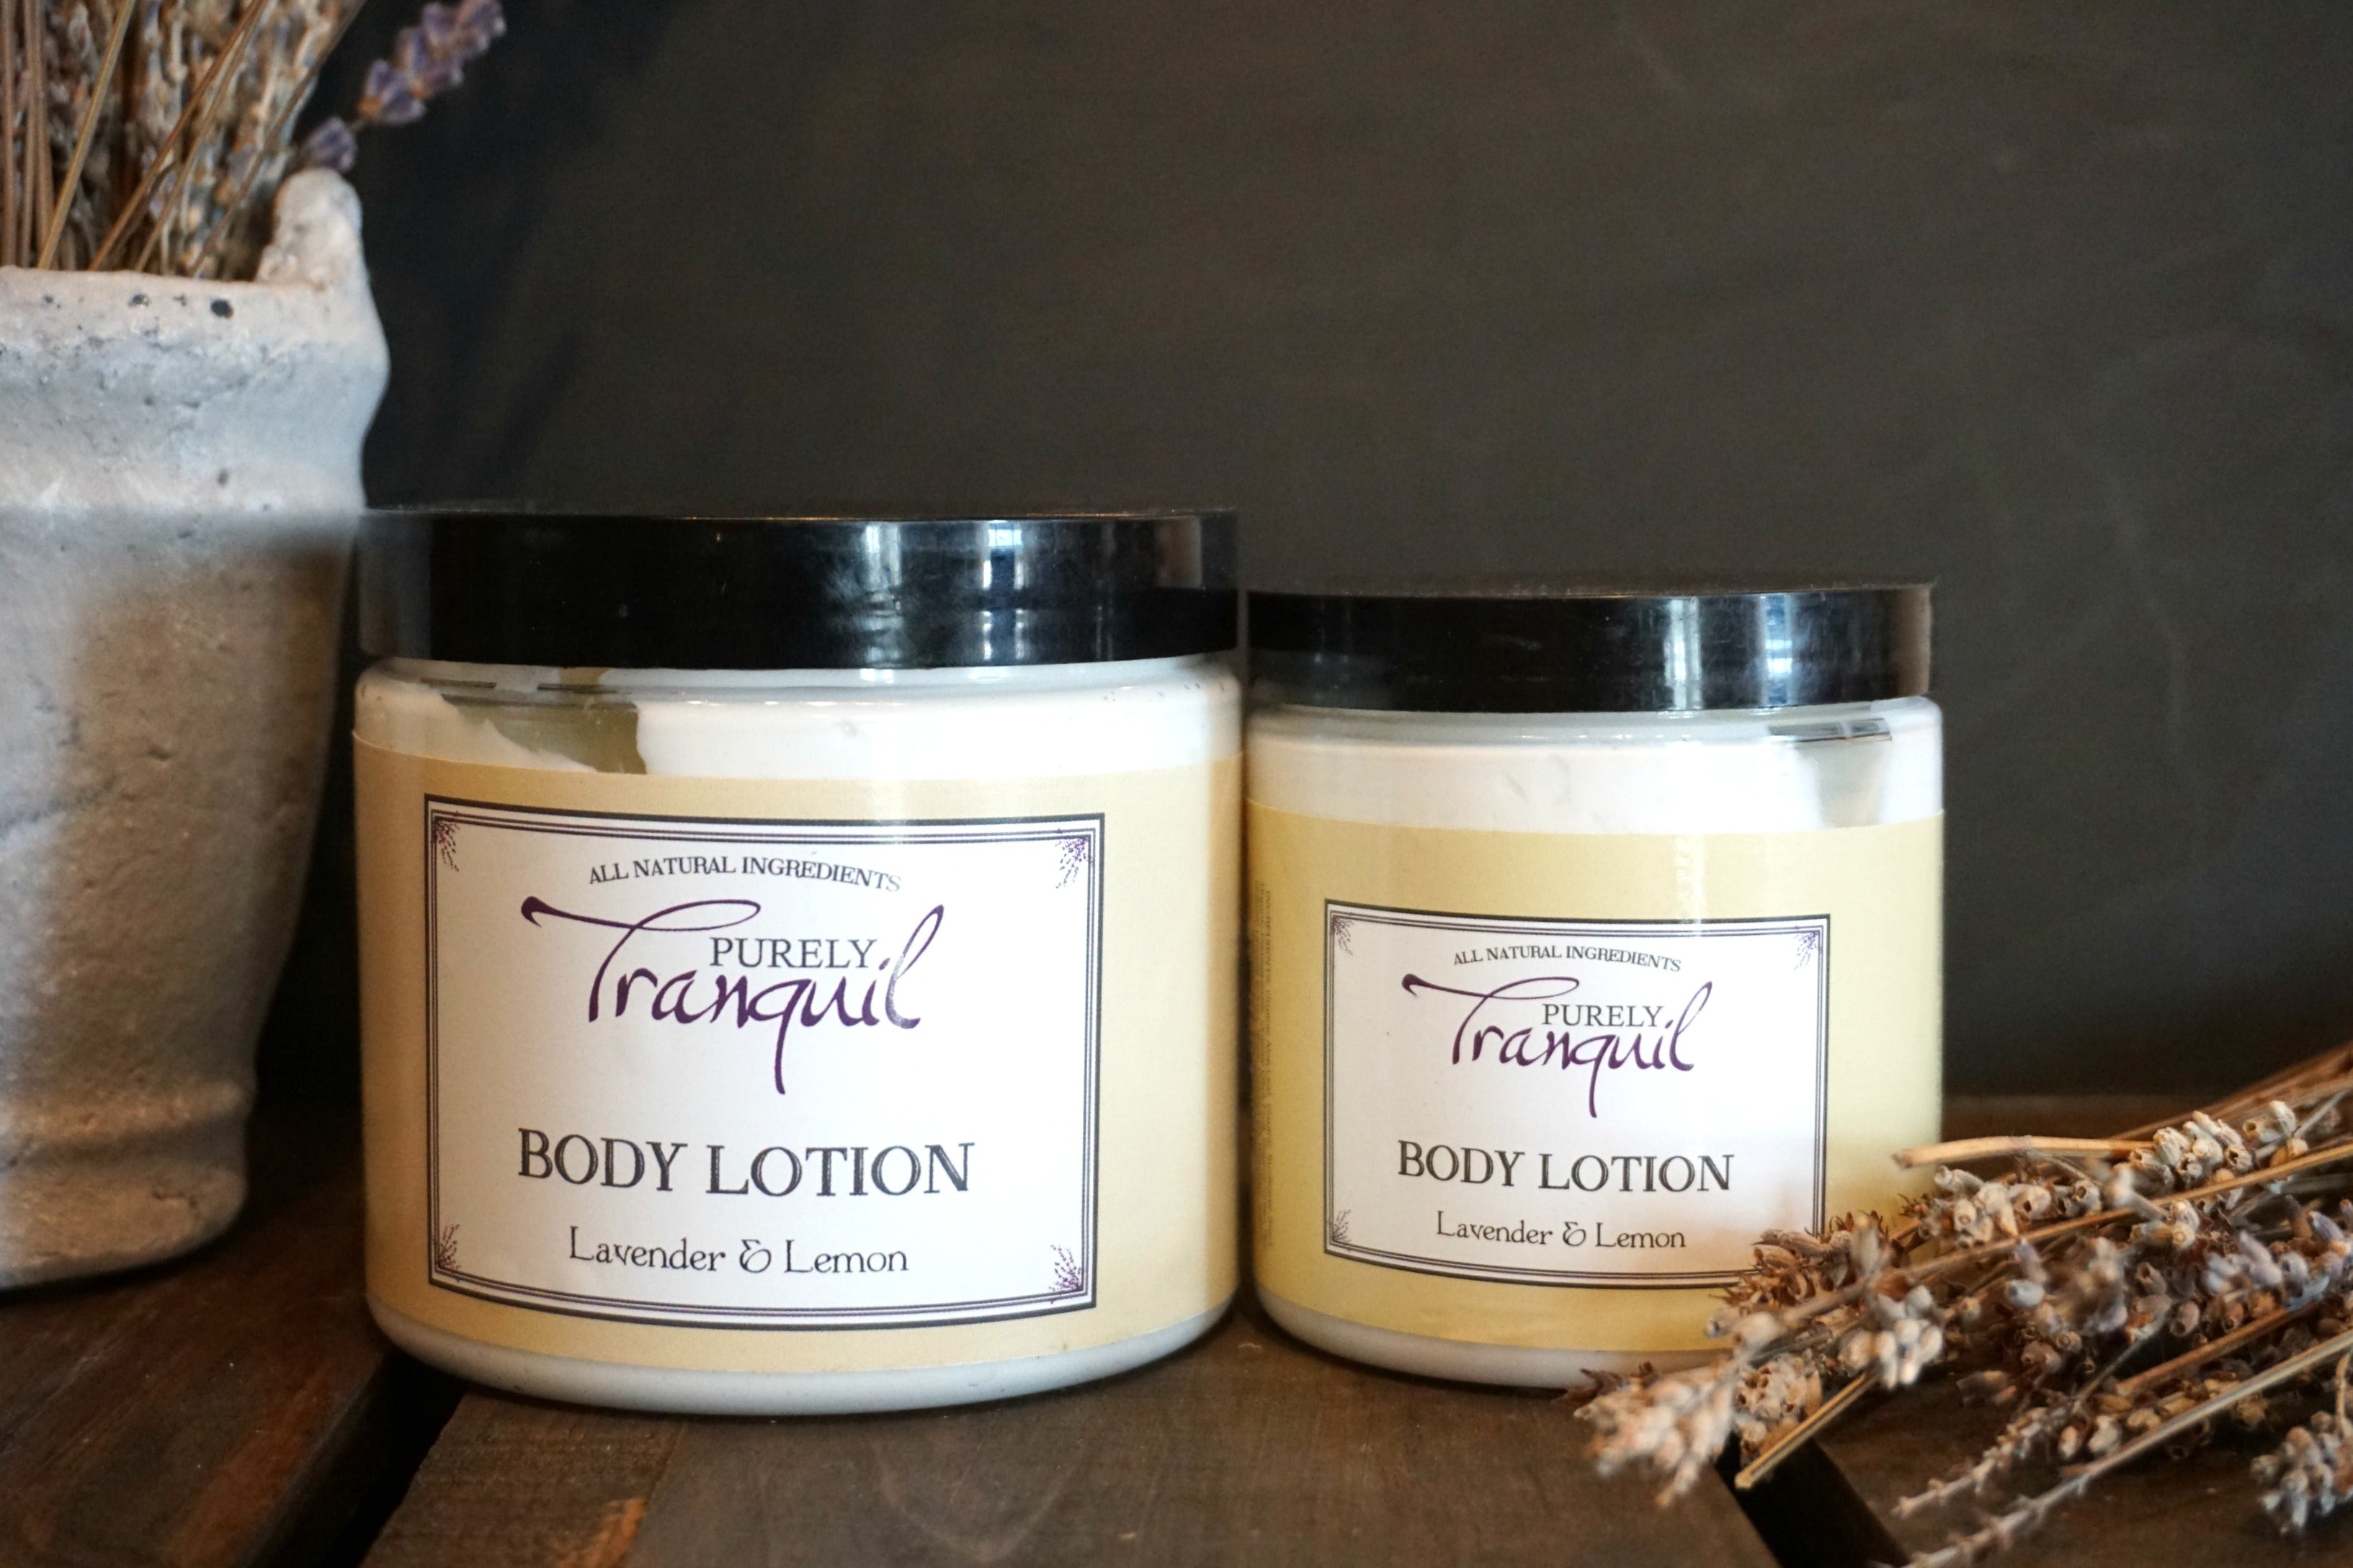 Purely Tranquil Body Lotion